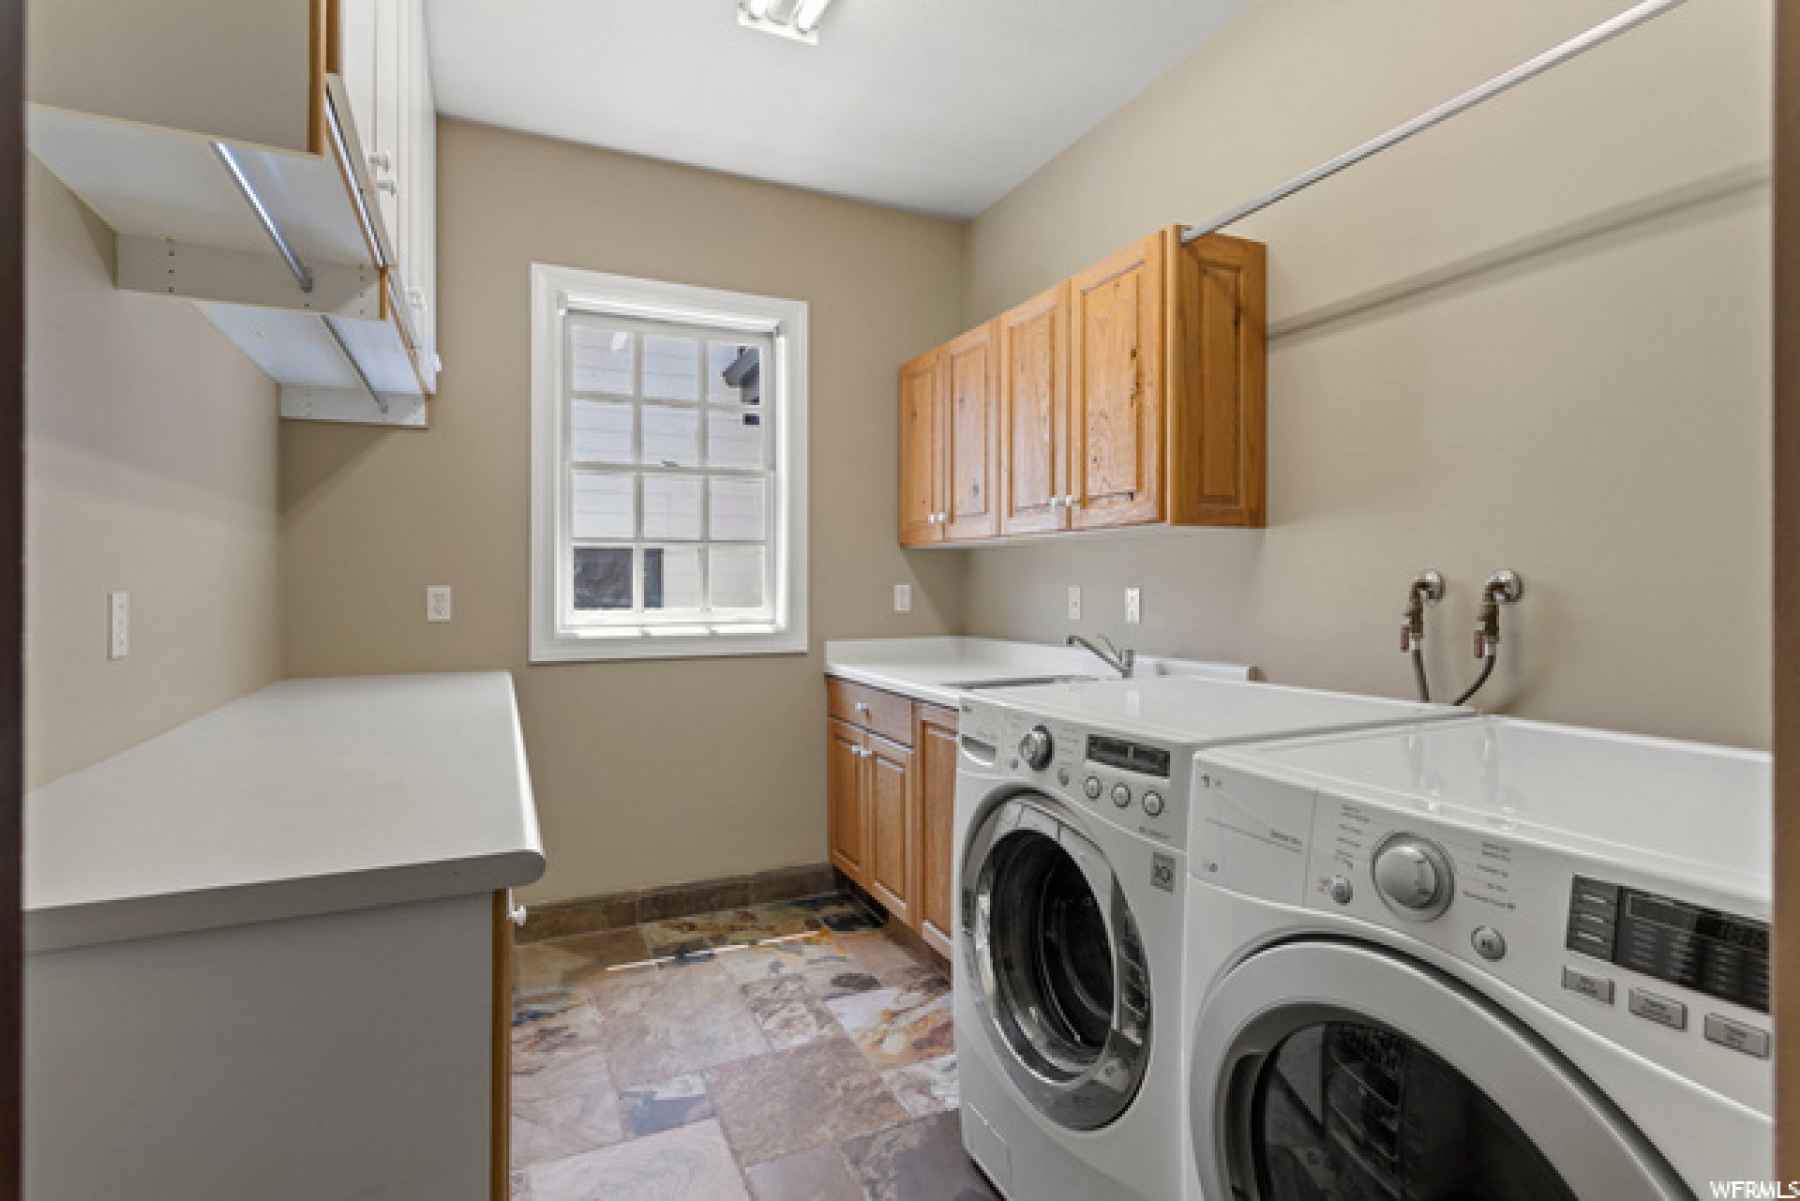 You might just enjoy doing laundry! Here you have a view of the backyard, plenty of storage cabinets and folding areas, built in ironing board!